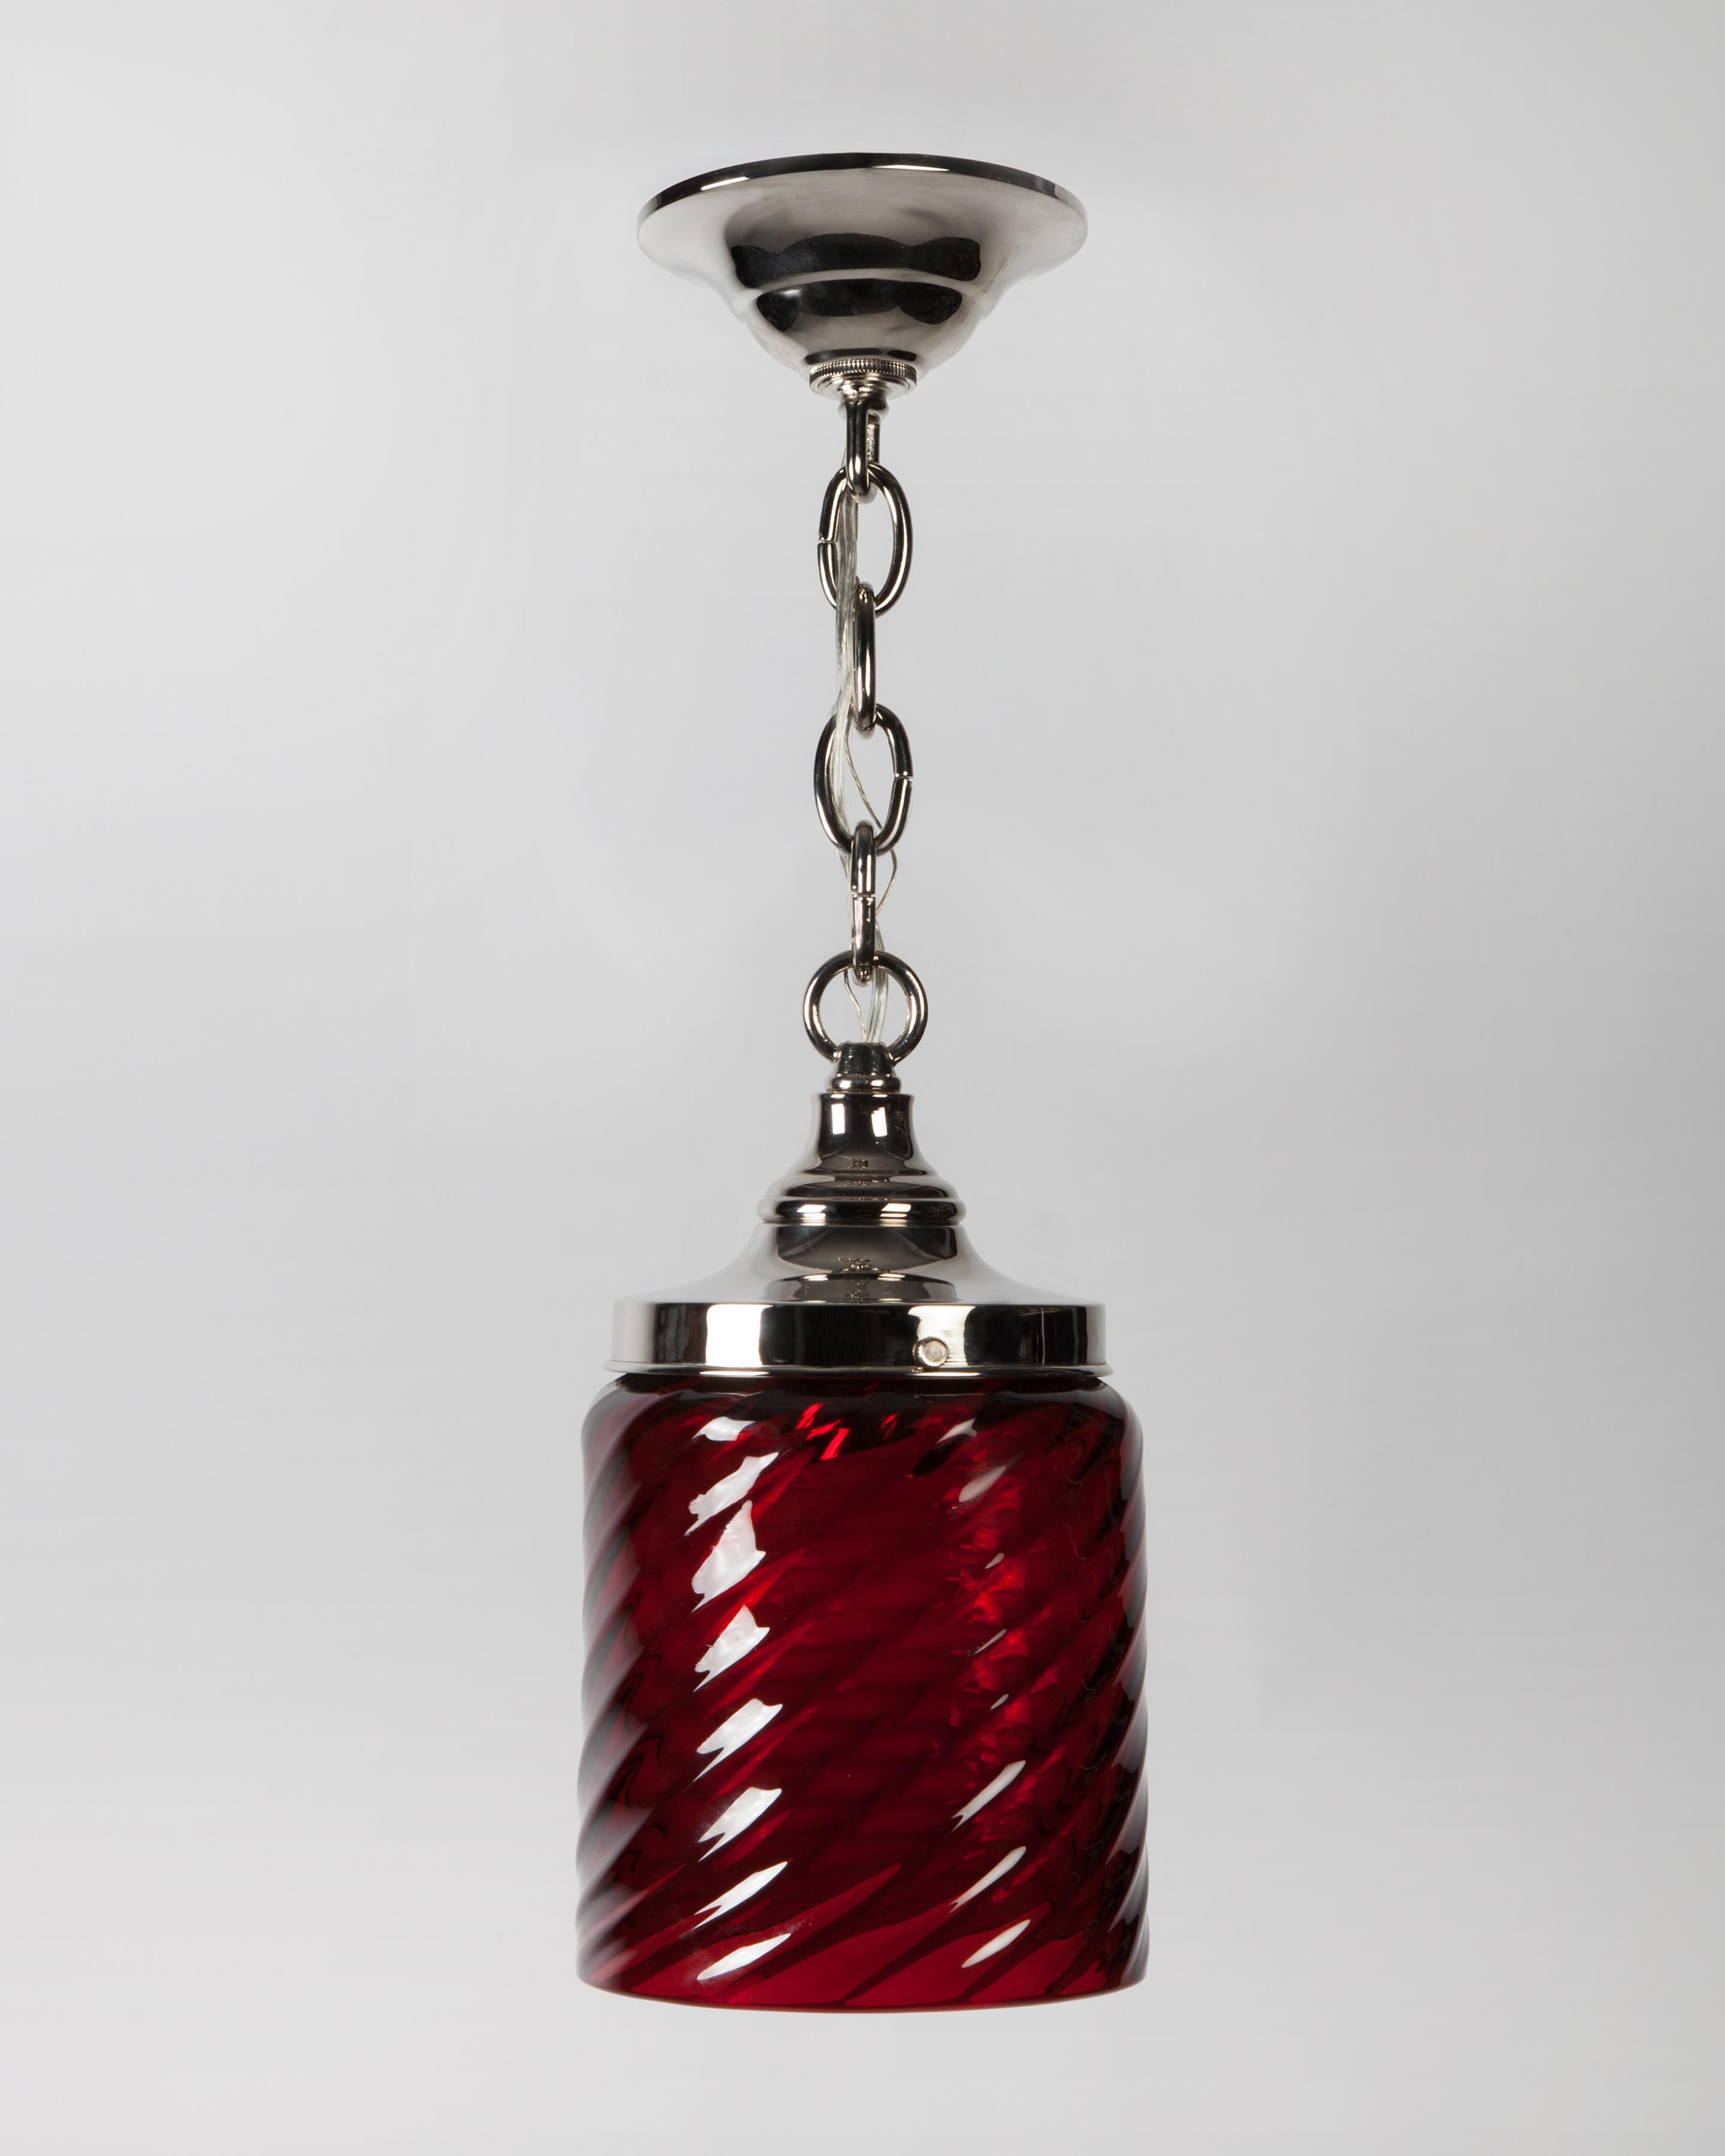  Nickel Pendant with Red Hand Blown Swirl Patterned Glass Cylinder, Circa 1900s In Good Condition For Sale In New York, NY